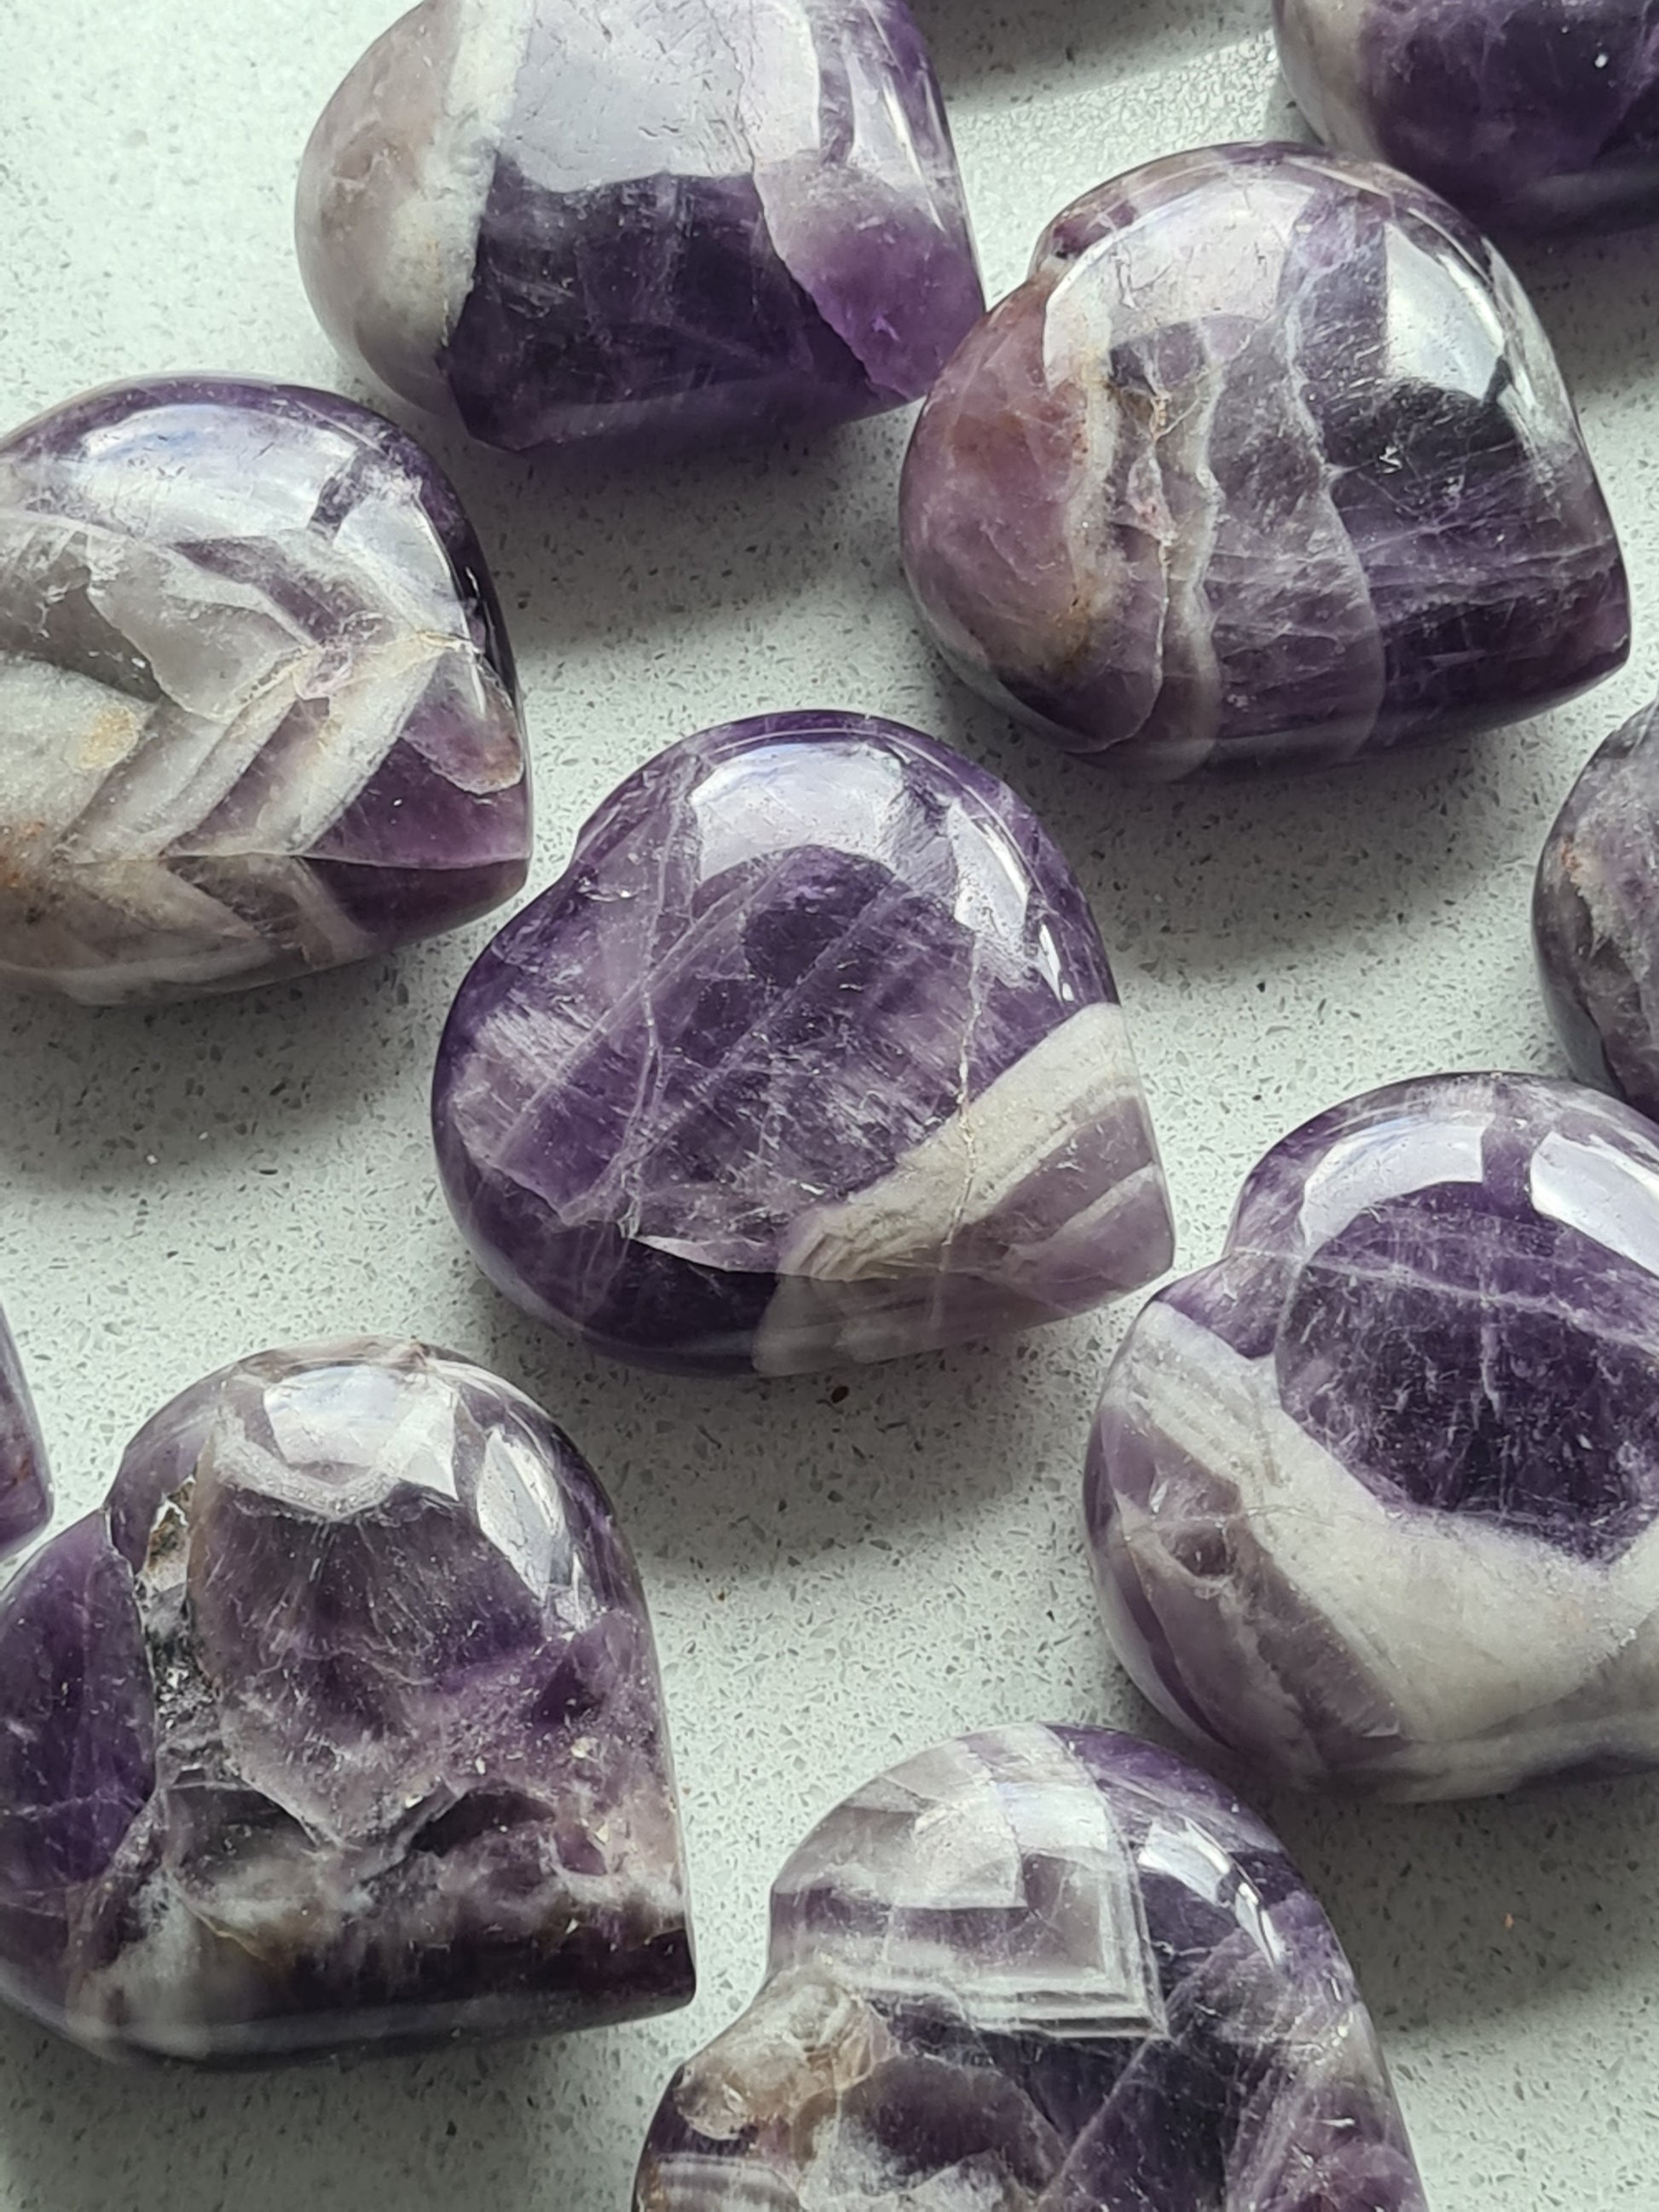 A collection of Dream Amethyst Polished Hearts, displaying purple and white banding. Intuitively chosen.